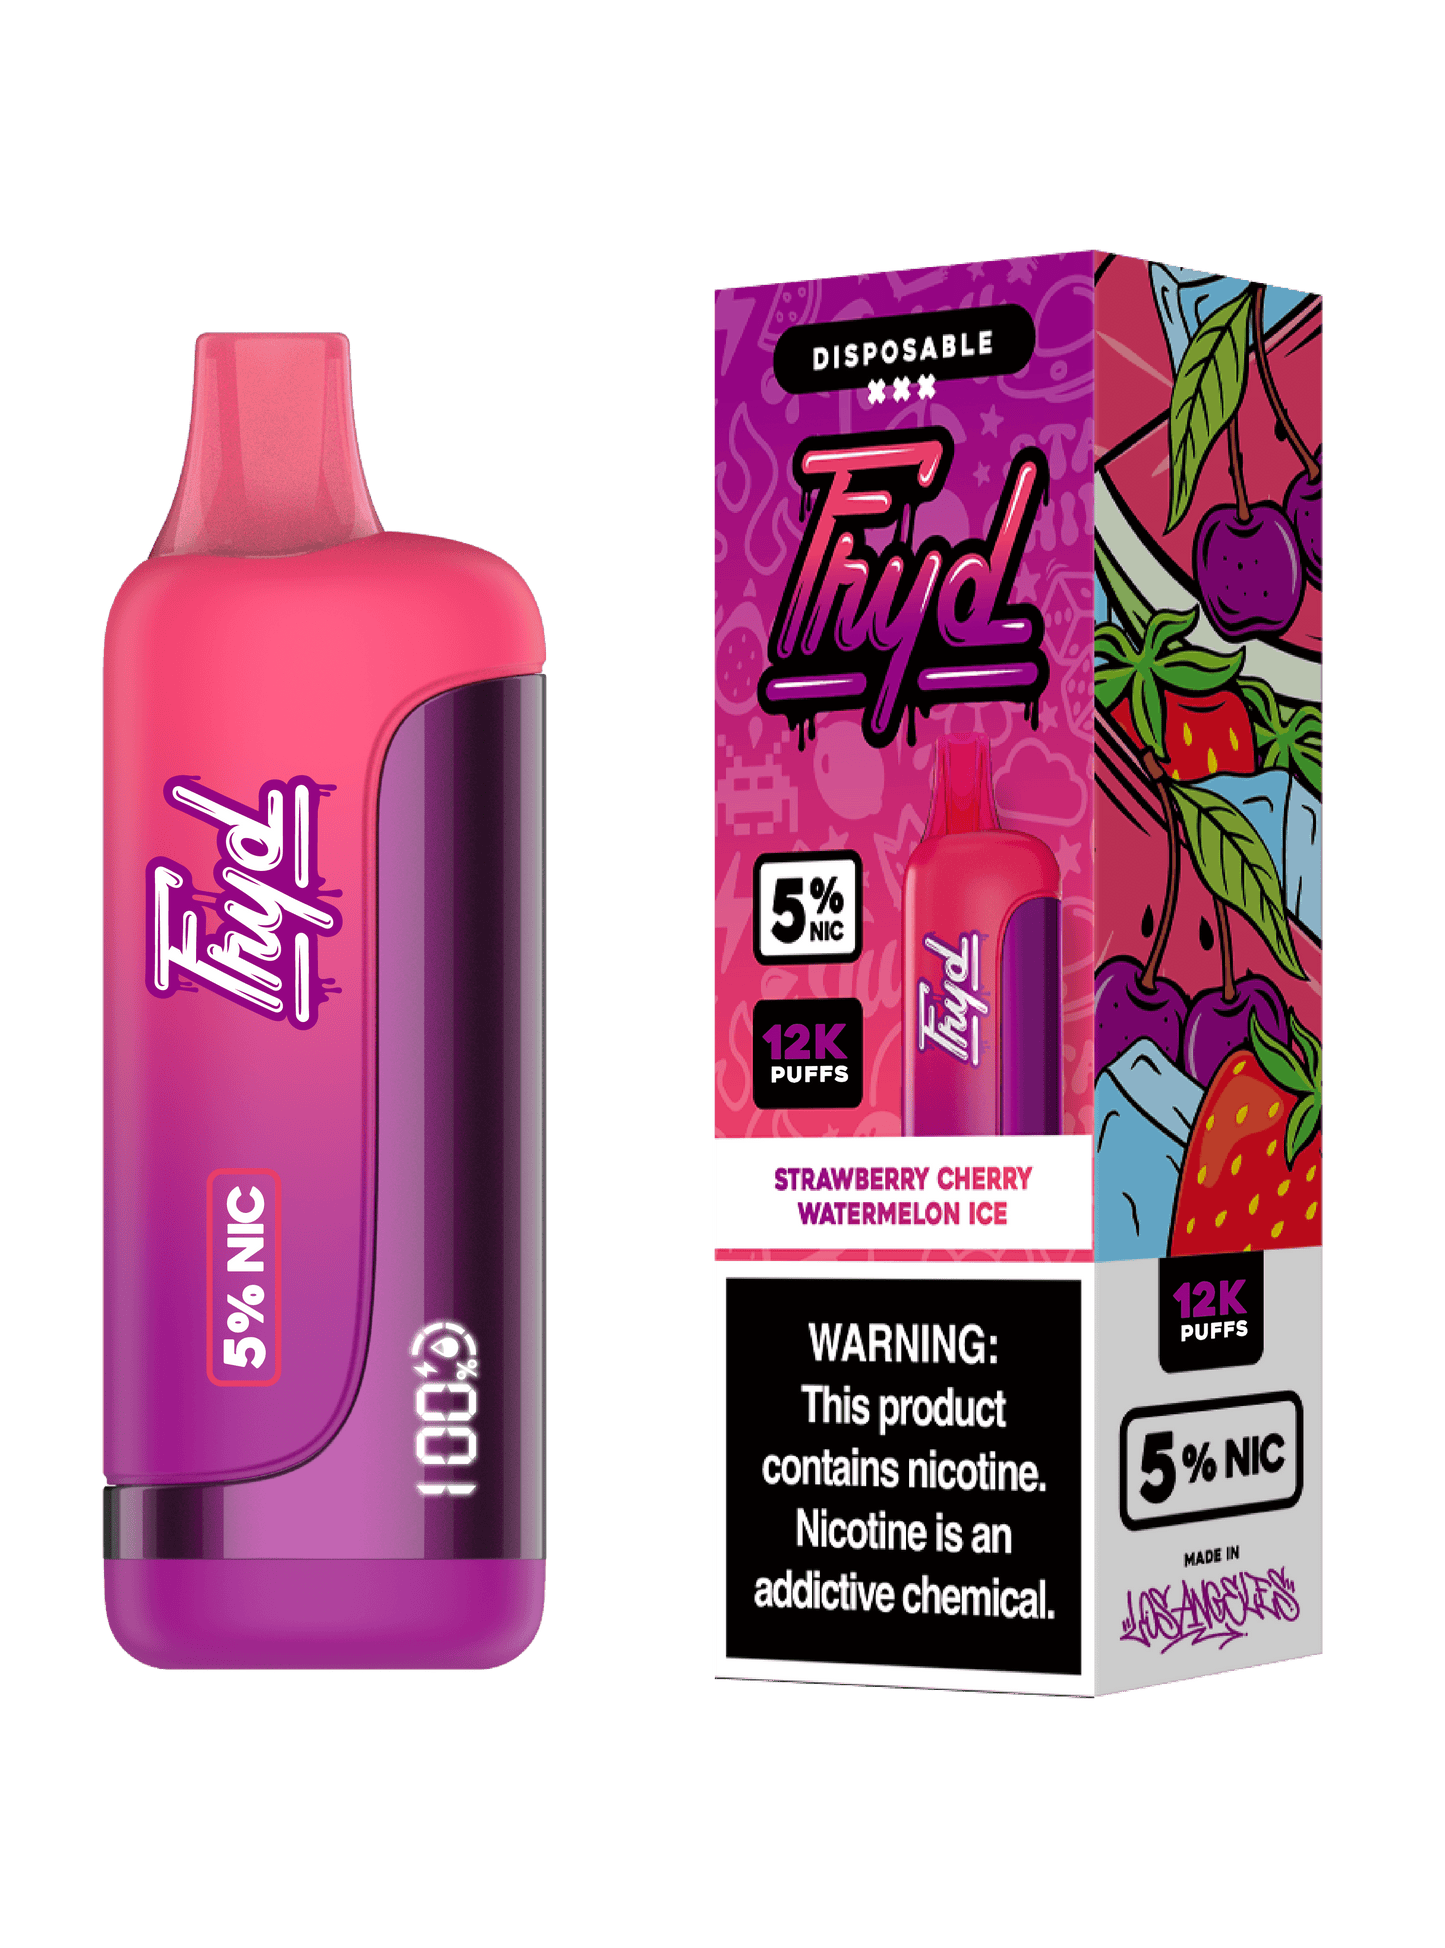 FRYD Disposable 12,000 Puffs (17mL) 50mg - Strawberry Cherry Watermelon Ice